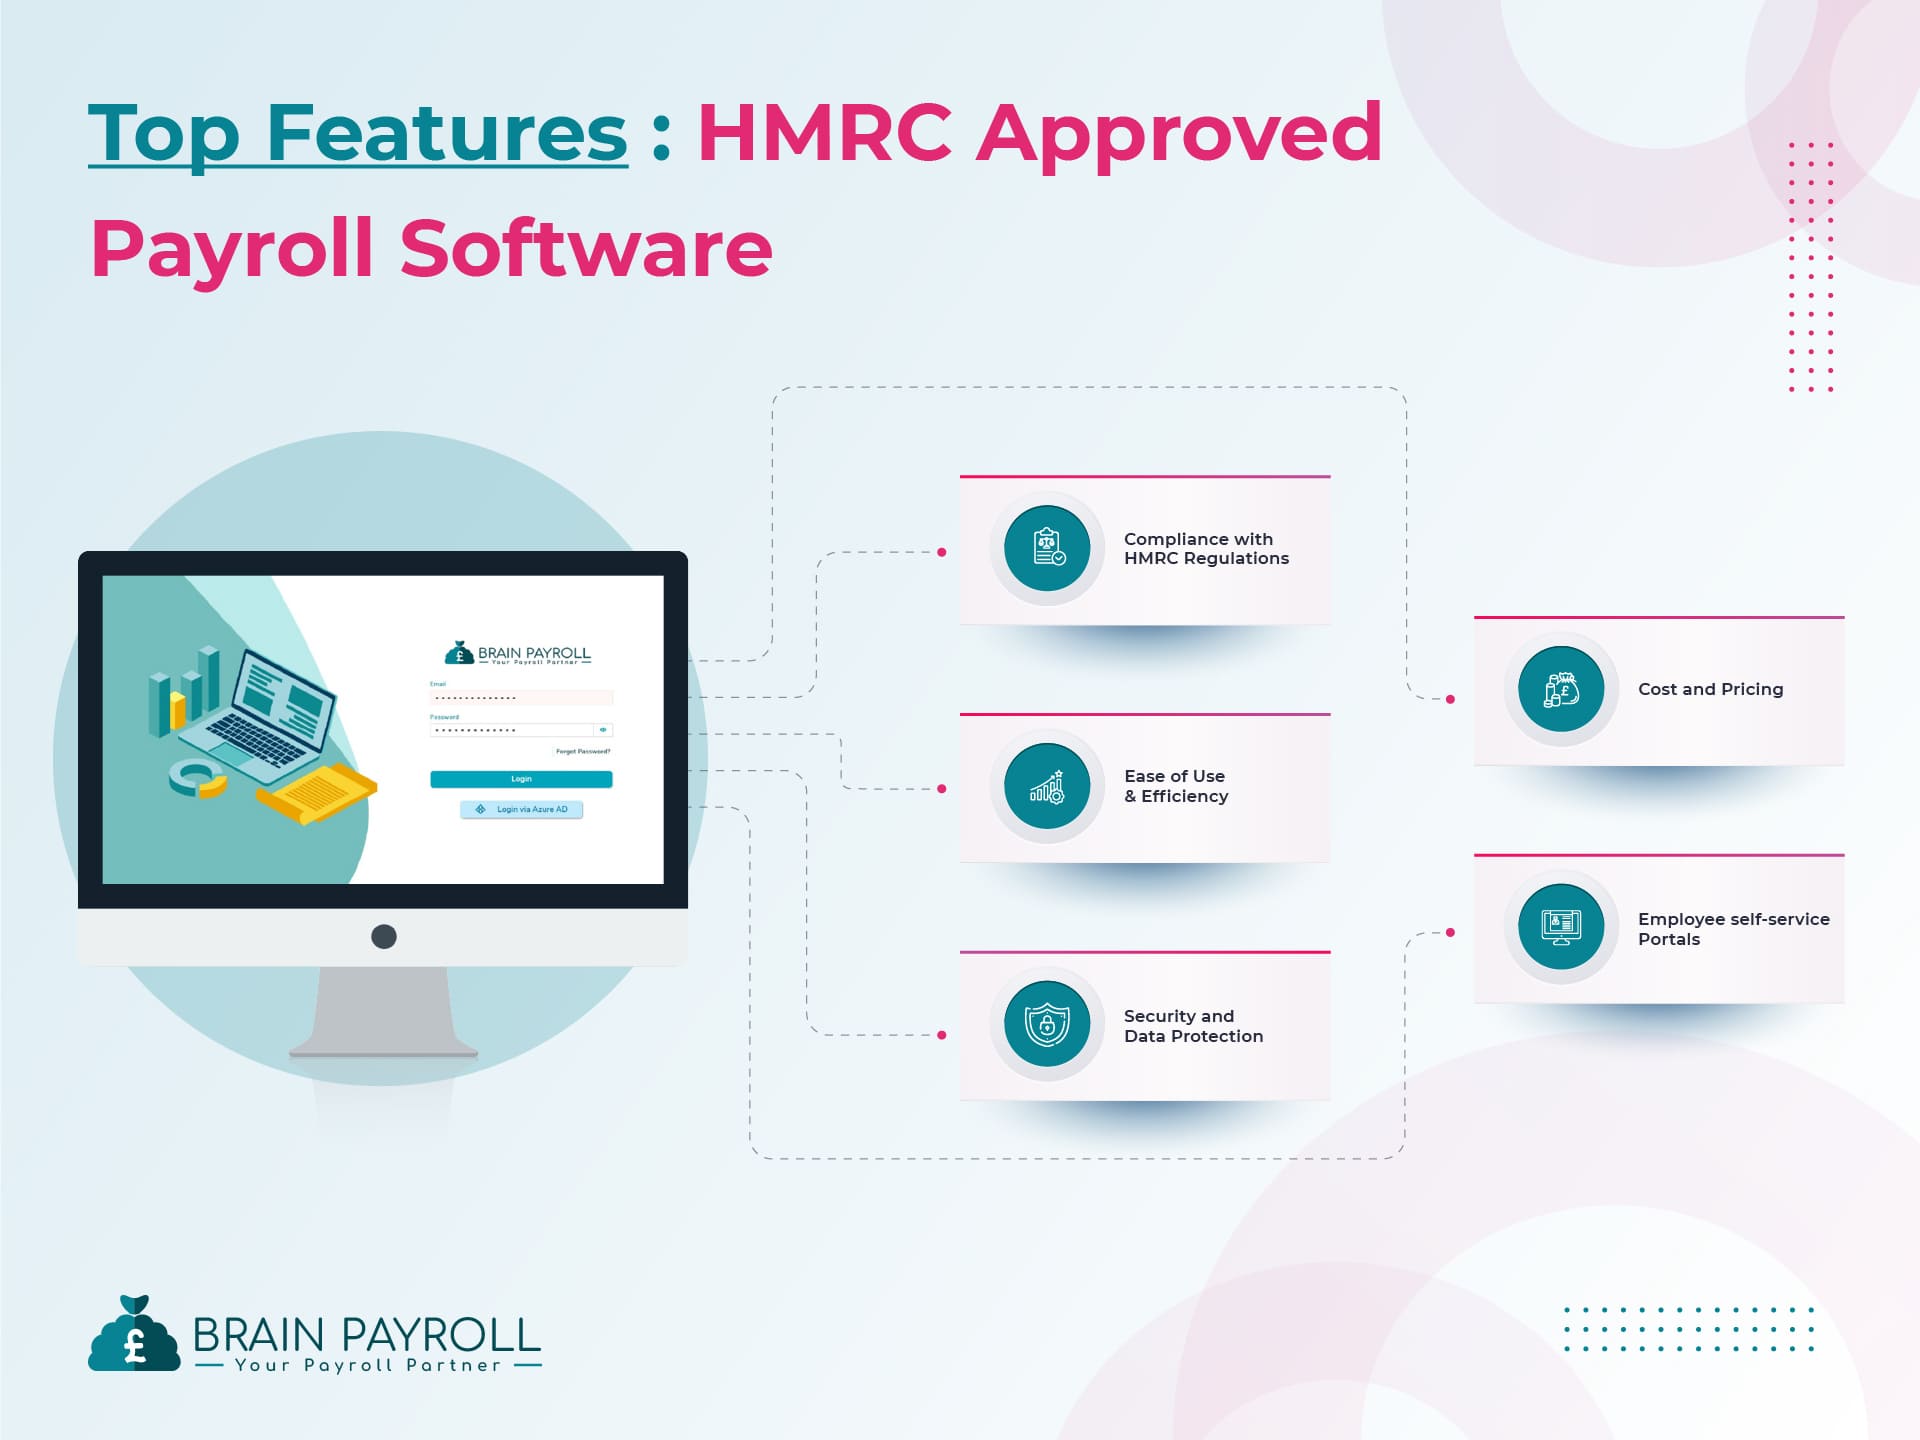 Top Features to Look for in HMRC Approved Payroll Software